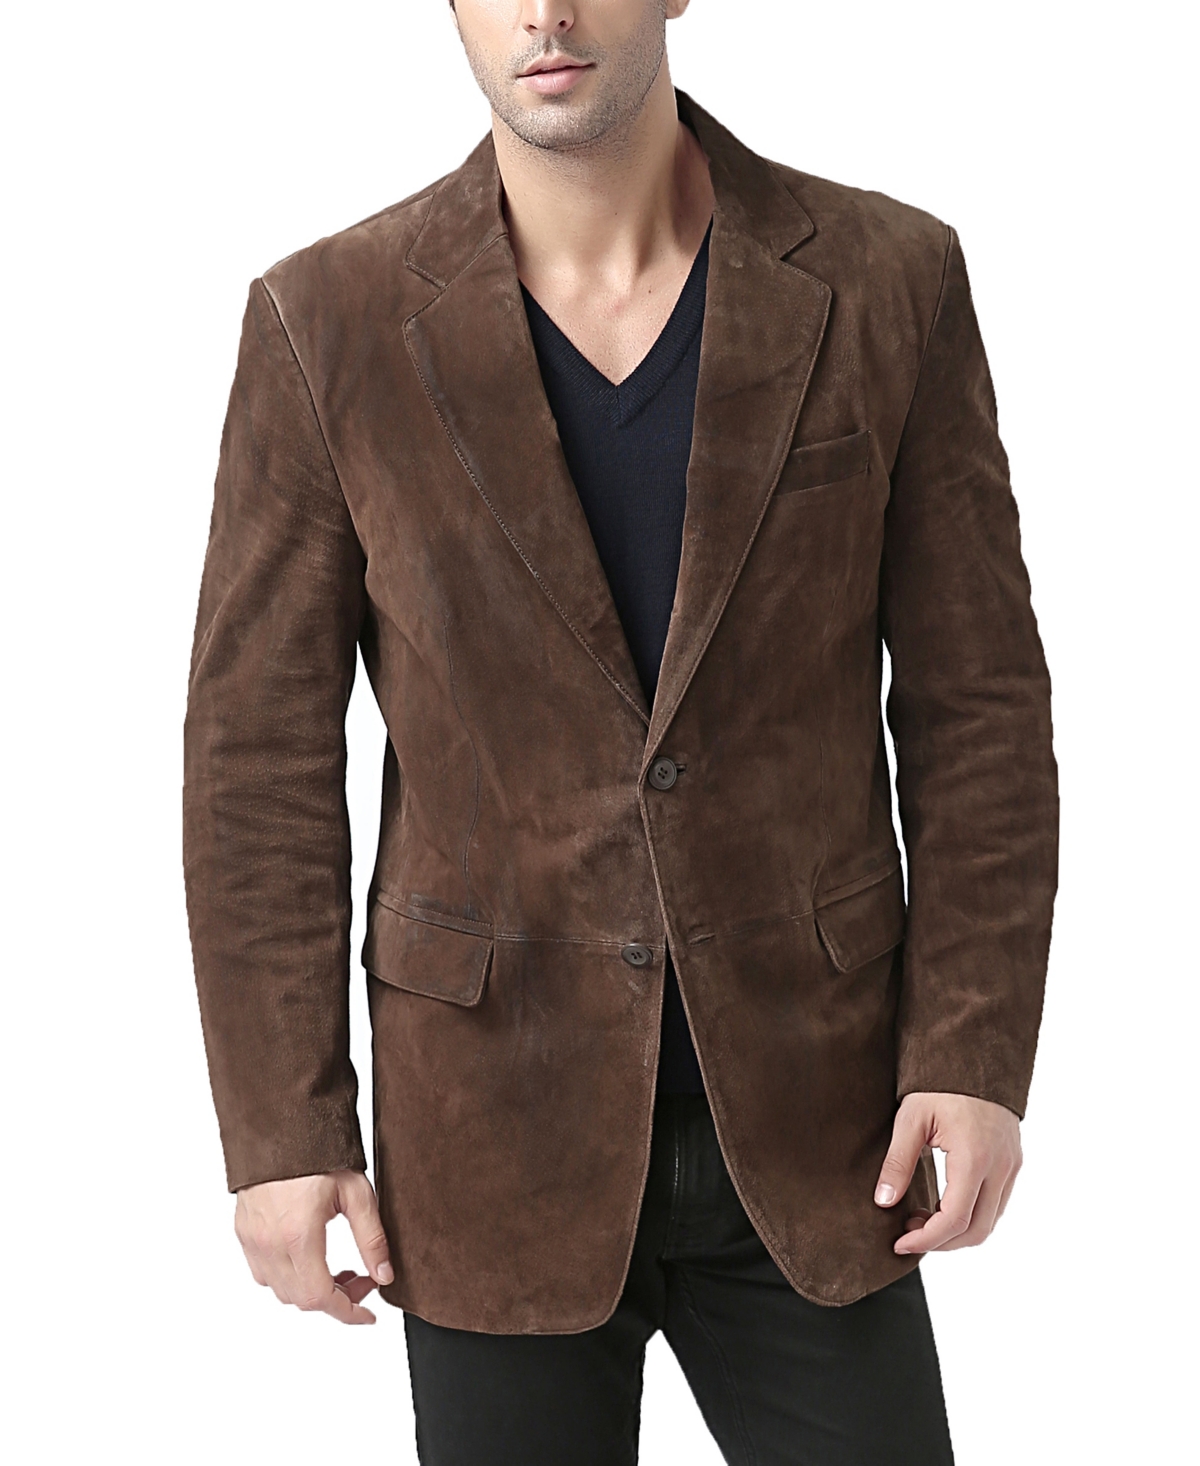 Men Cliff Classic Two-Button Suede Leather Blazer - Tall - Brown